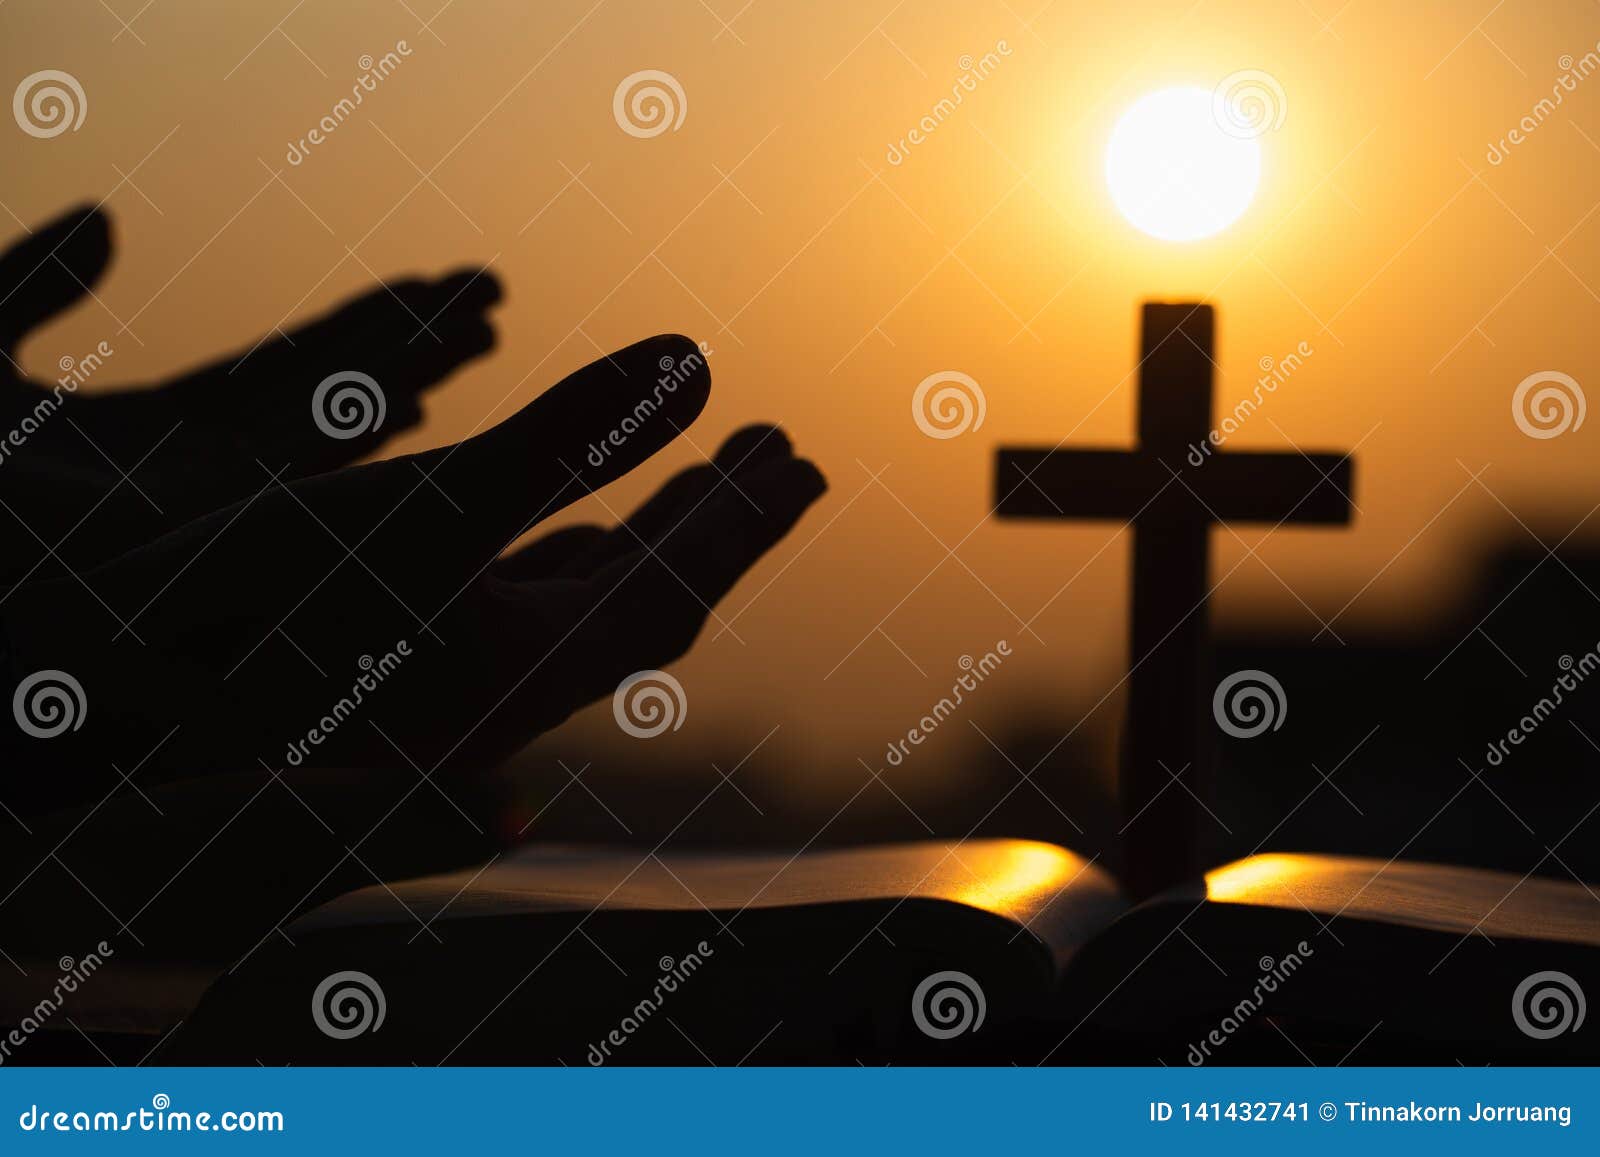 human hands open palm up worship. praying to god. eucharist therapy bless god helping repent catholic easter lent mind pray.